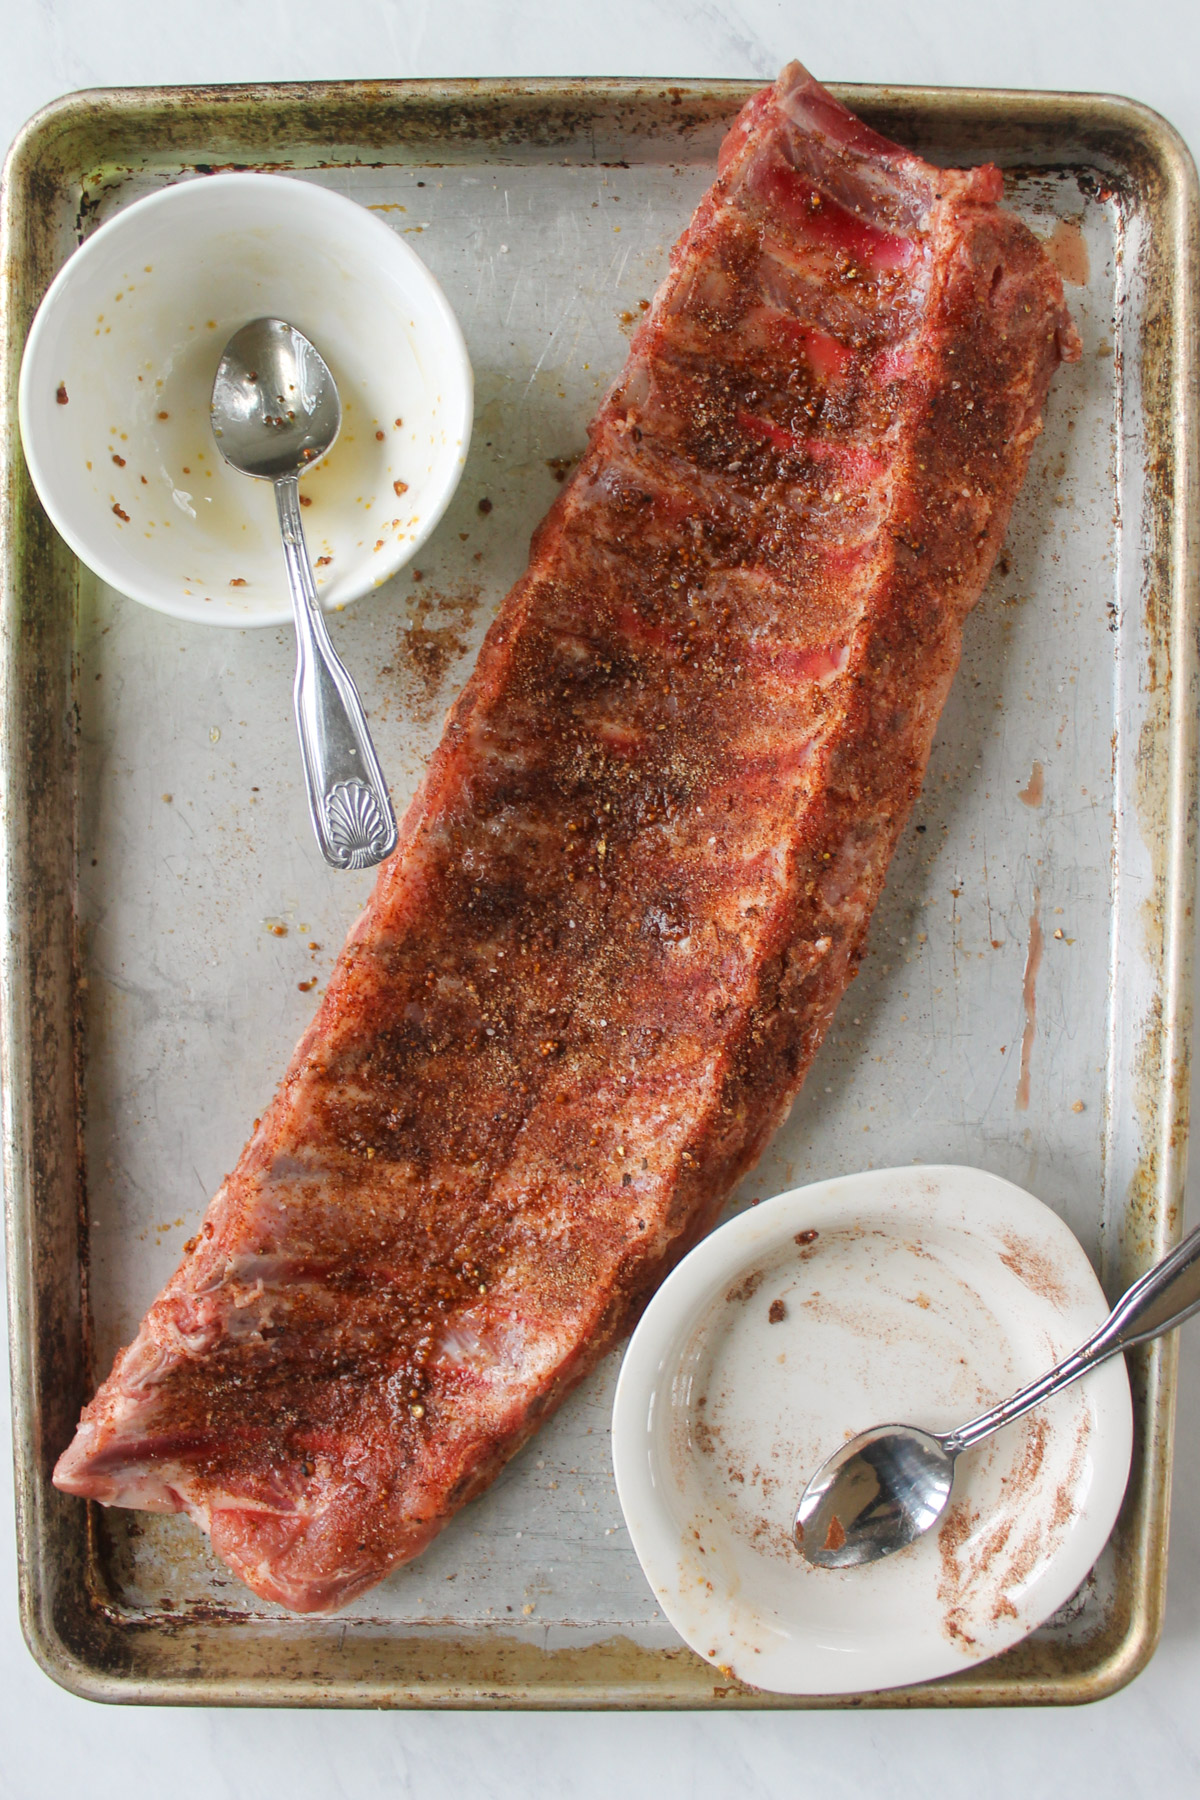 A rack of pork ribs on a sheet pan that have been coated in dry rub seasoning.